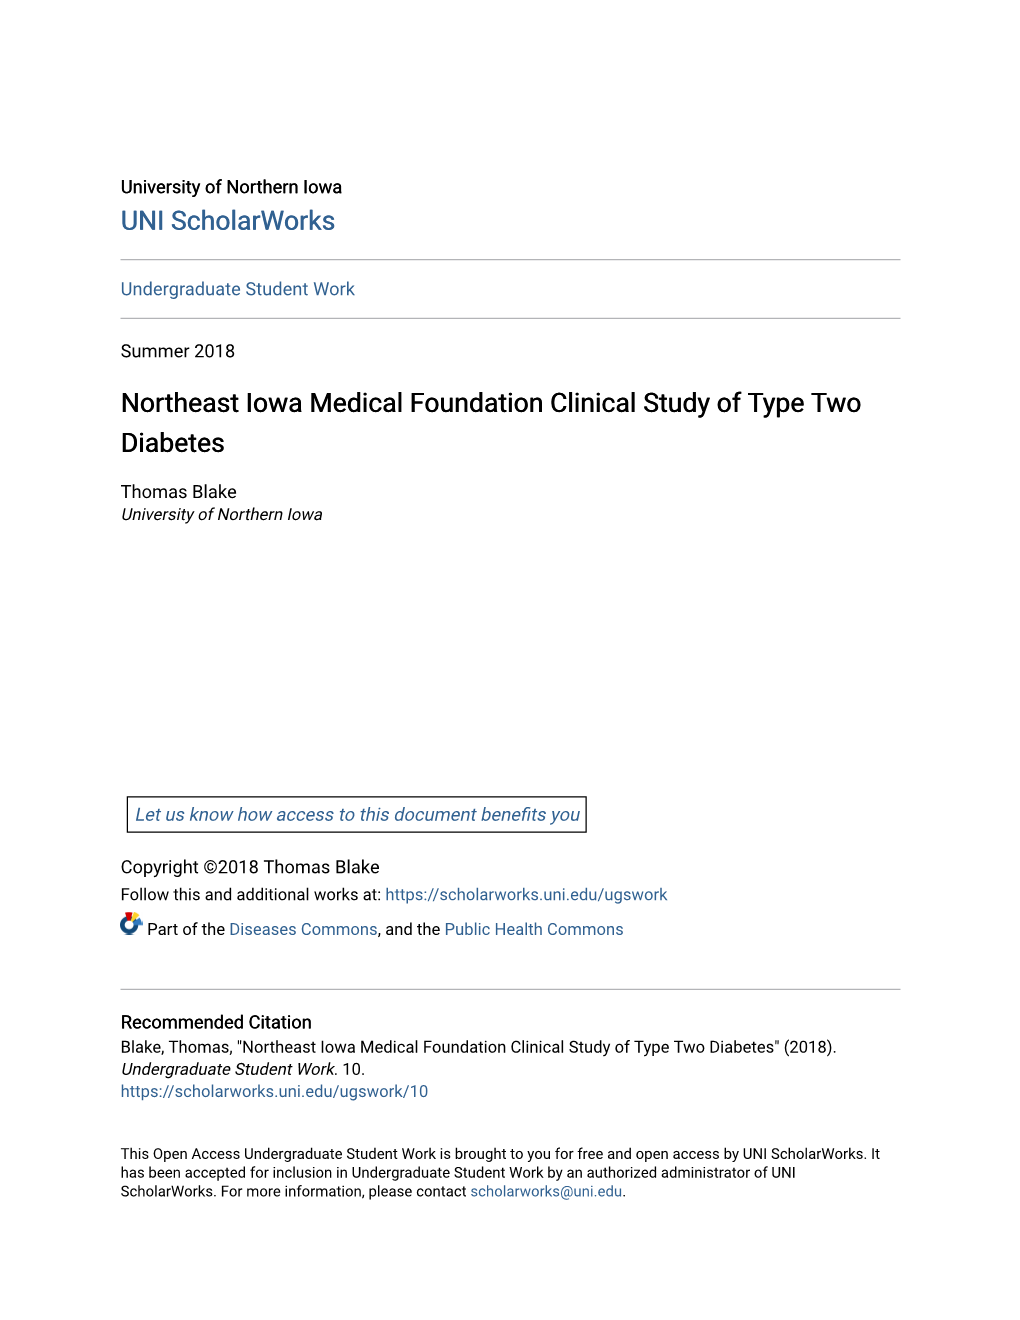 Northeast Iowa Medical Foundation Clinical Study of Type Two Diabetes